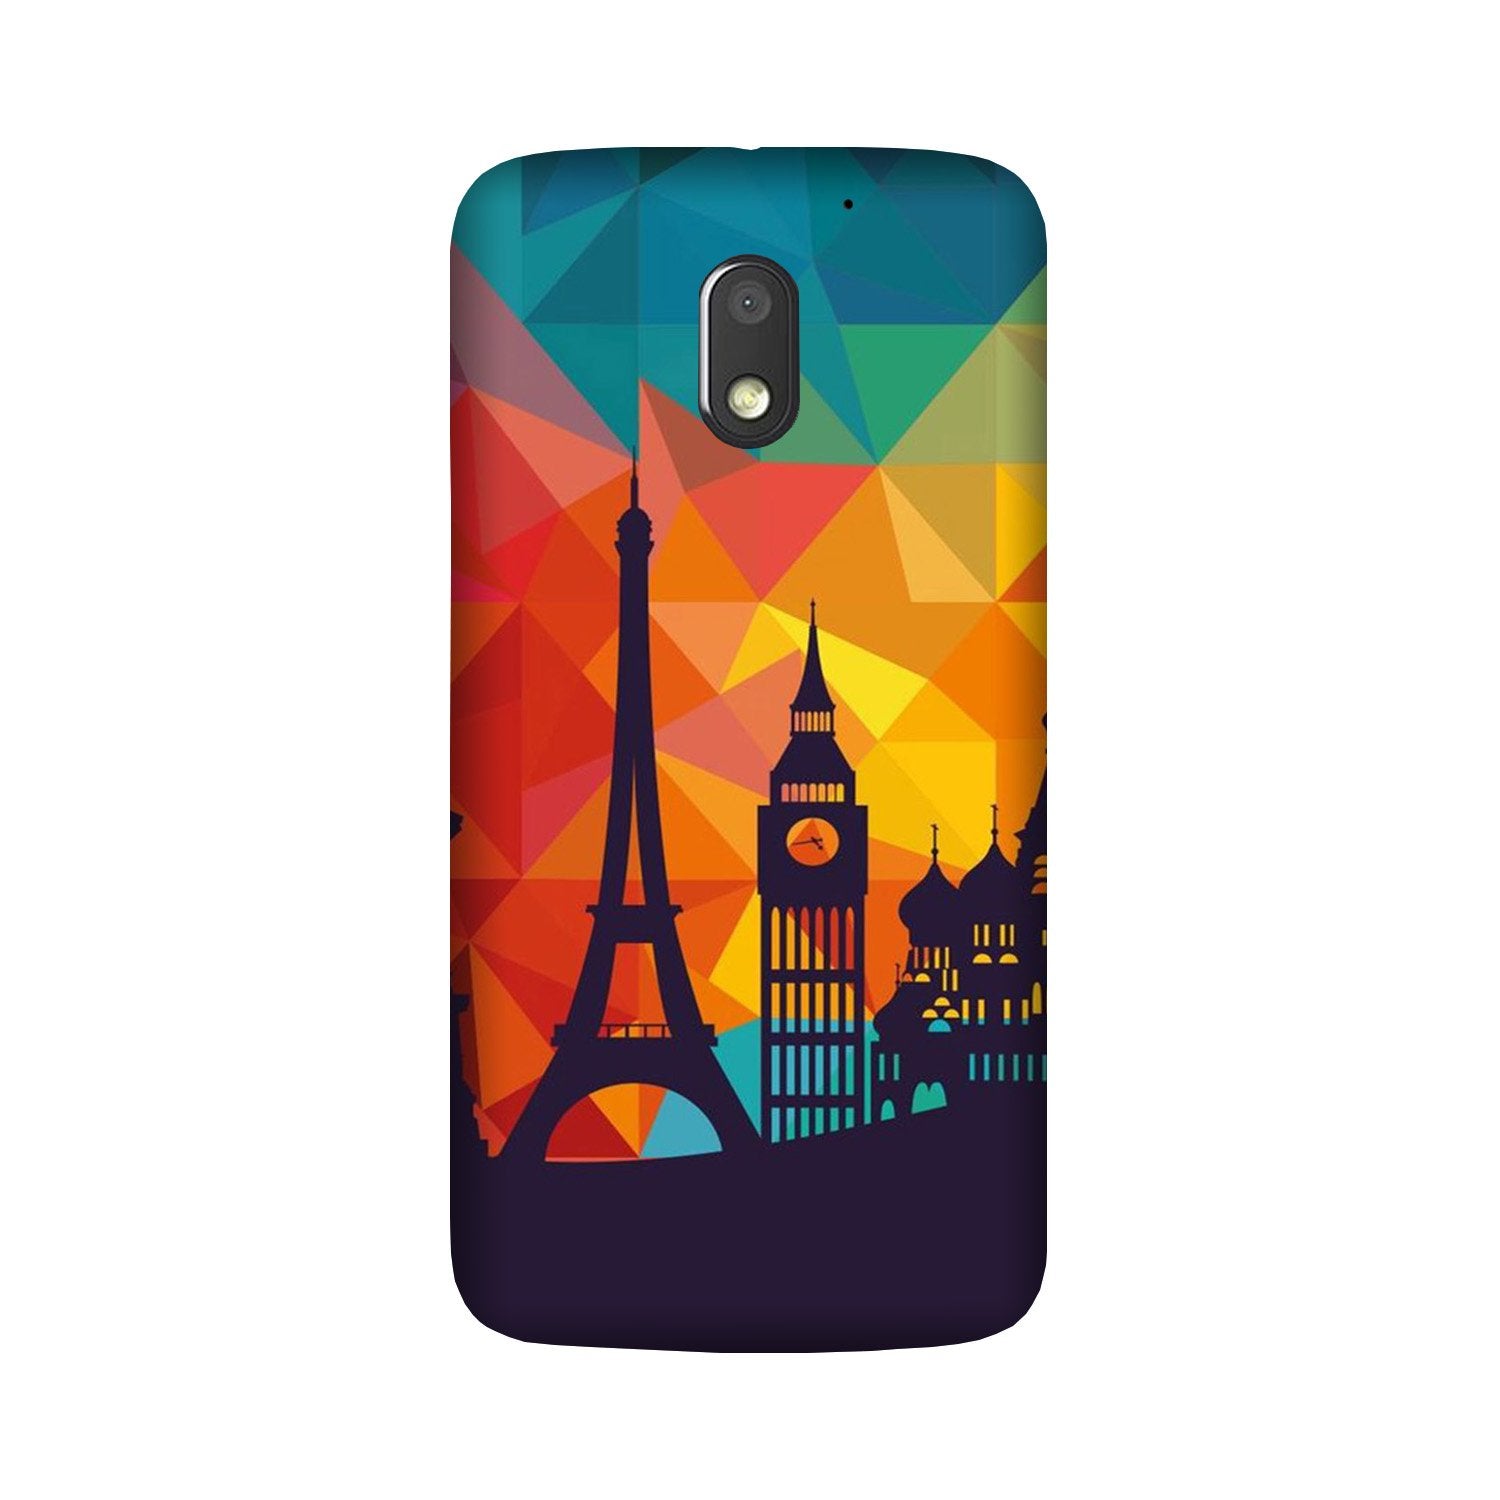 Eiffel Tower2 Case for Moto G4 Play